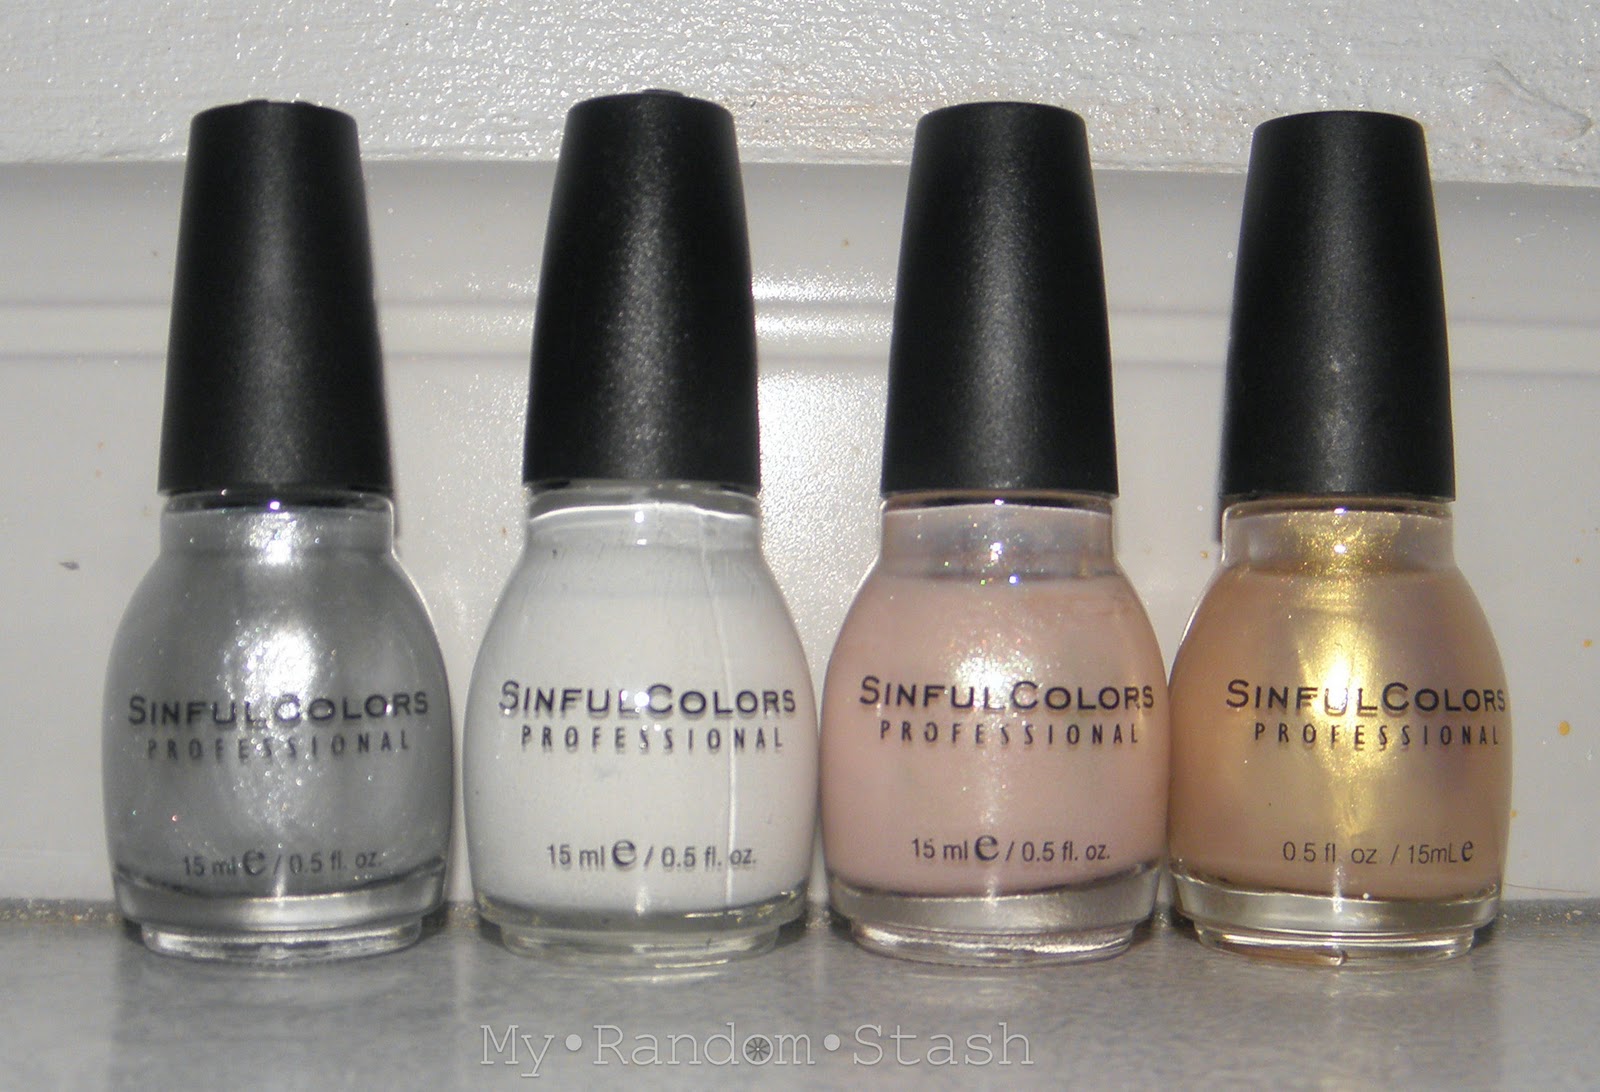 6. Sinful Colors Professional Nail Polish - Pinky Peach - wide 5